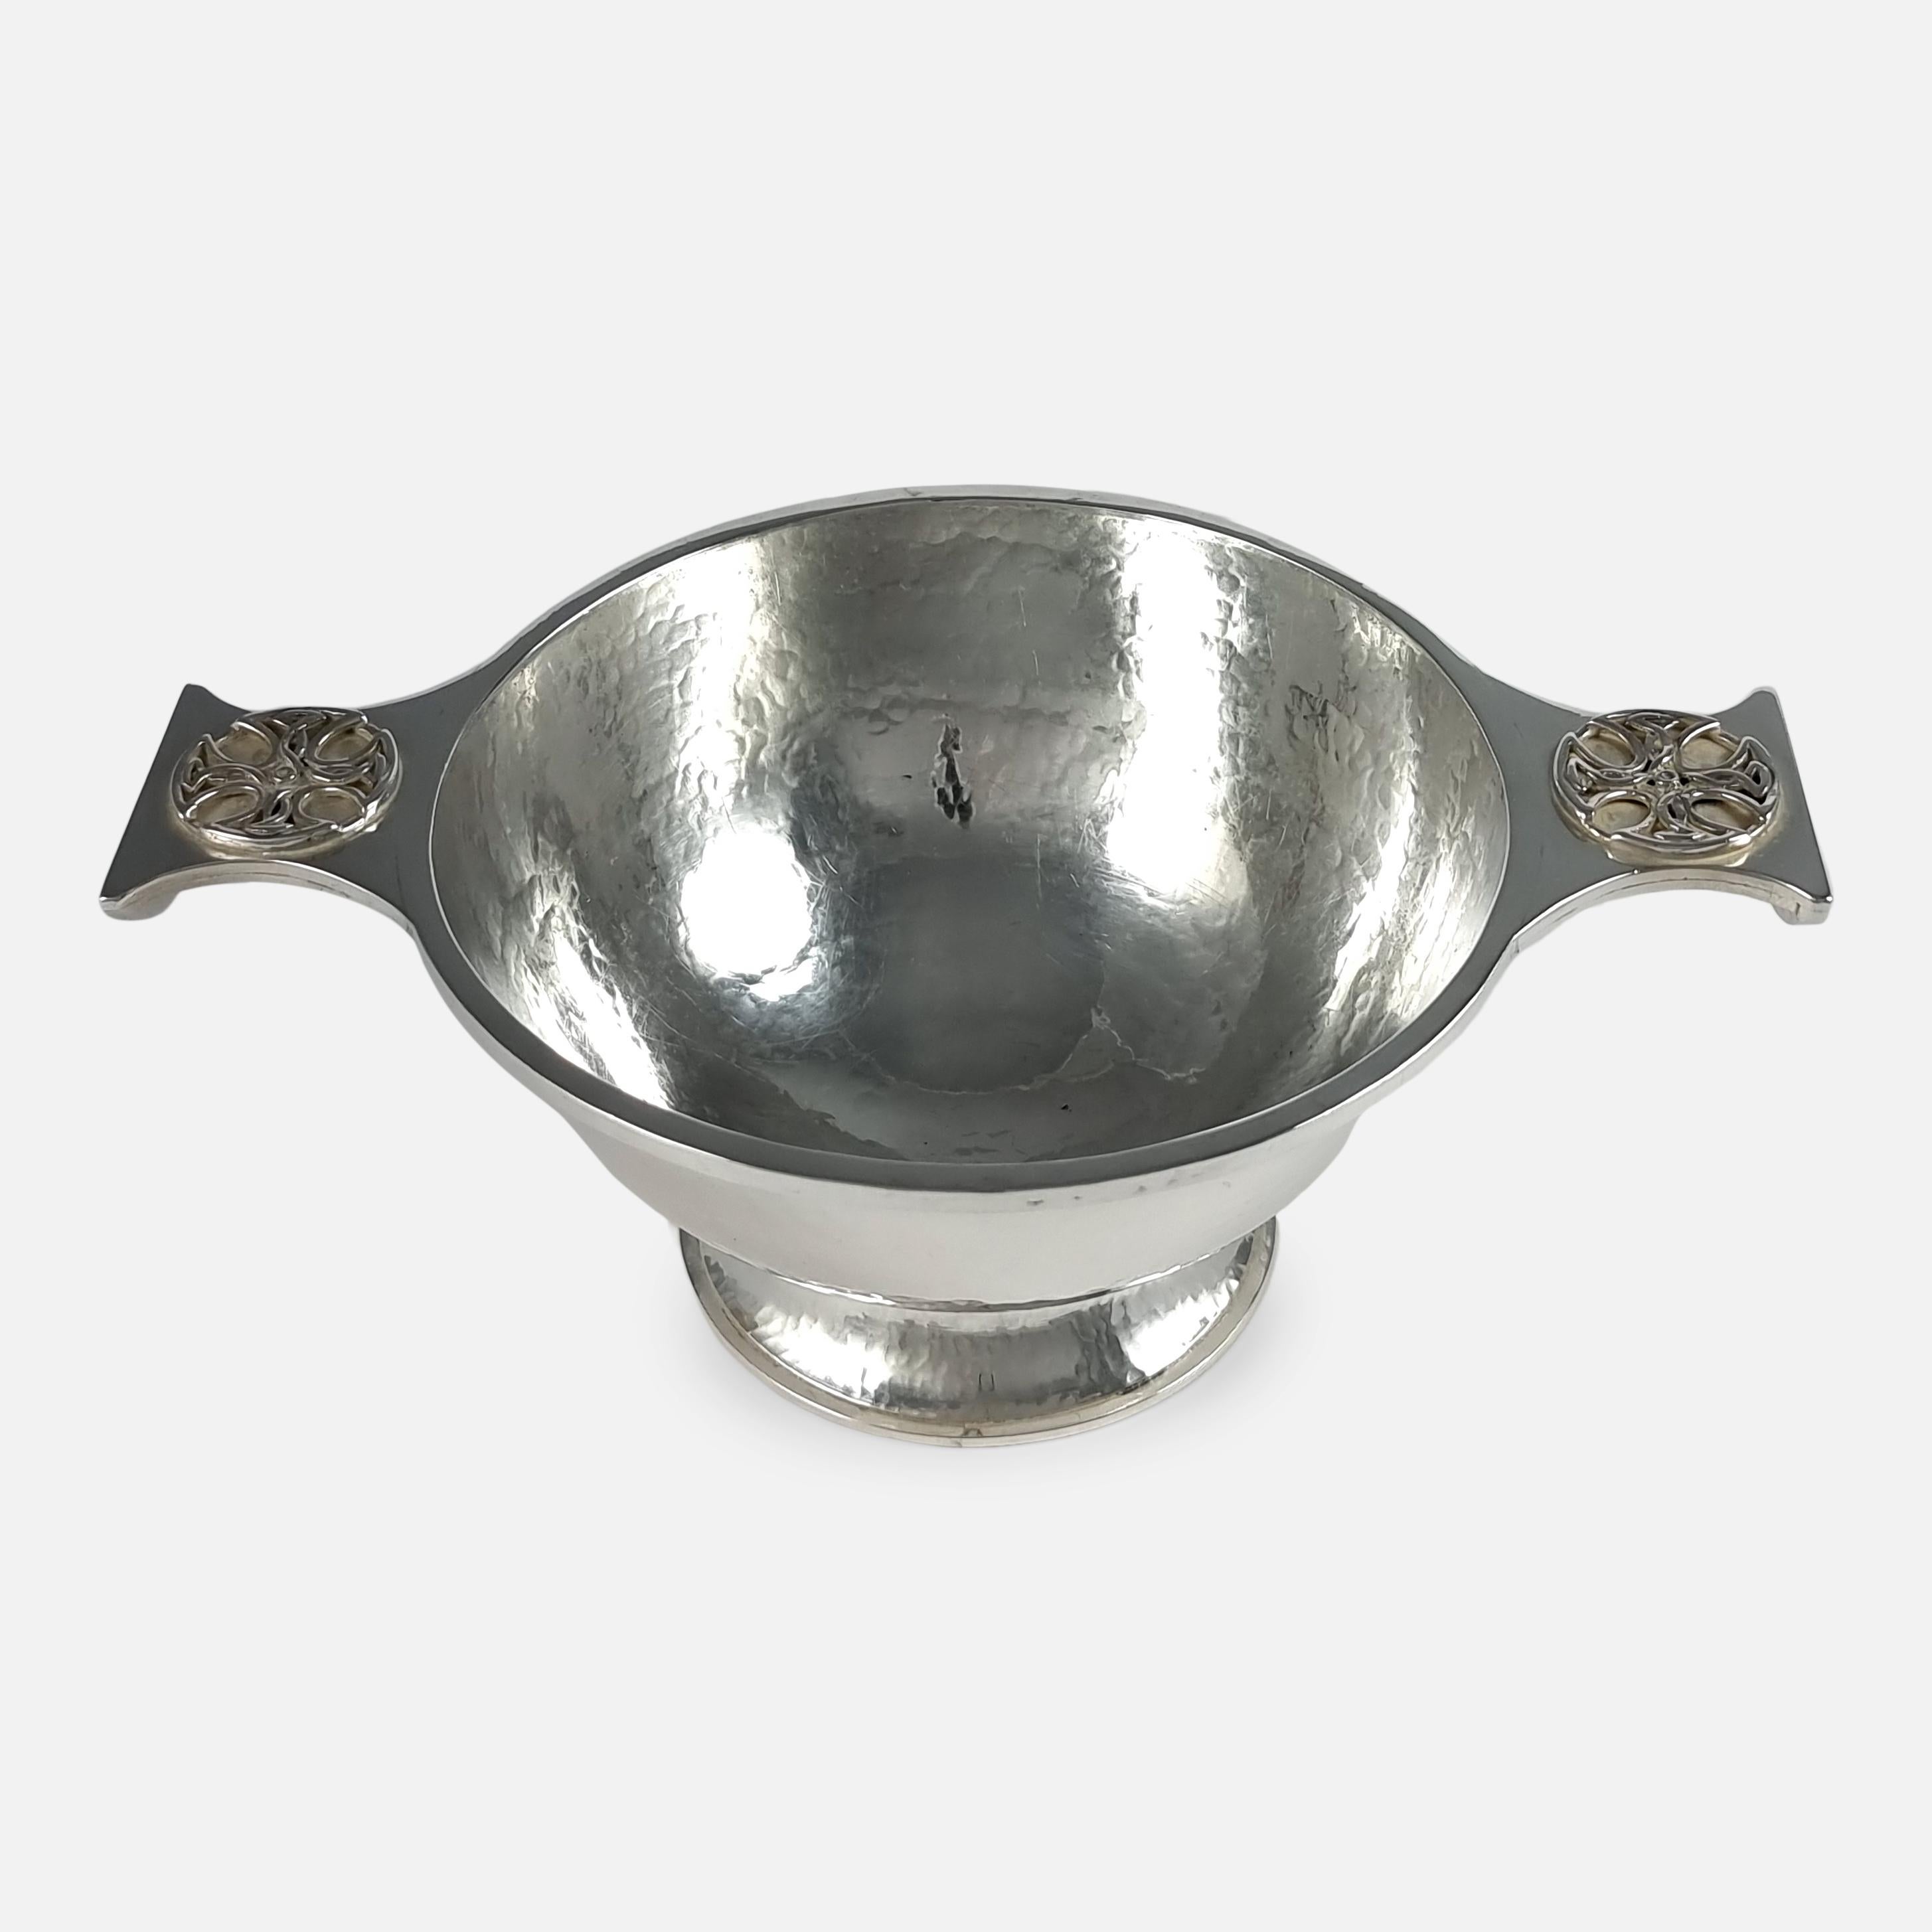 British Arts and Crafts Sterling Silver Quaich, Sibyl Dunlop, 1933